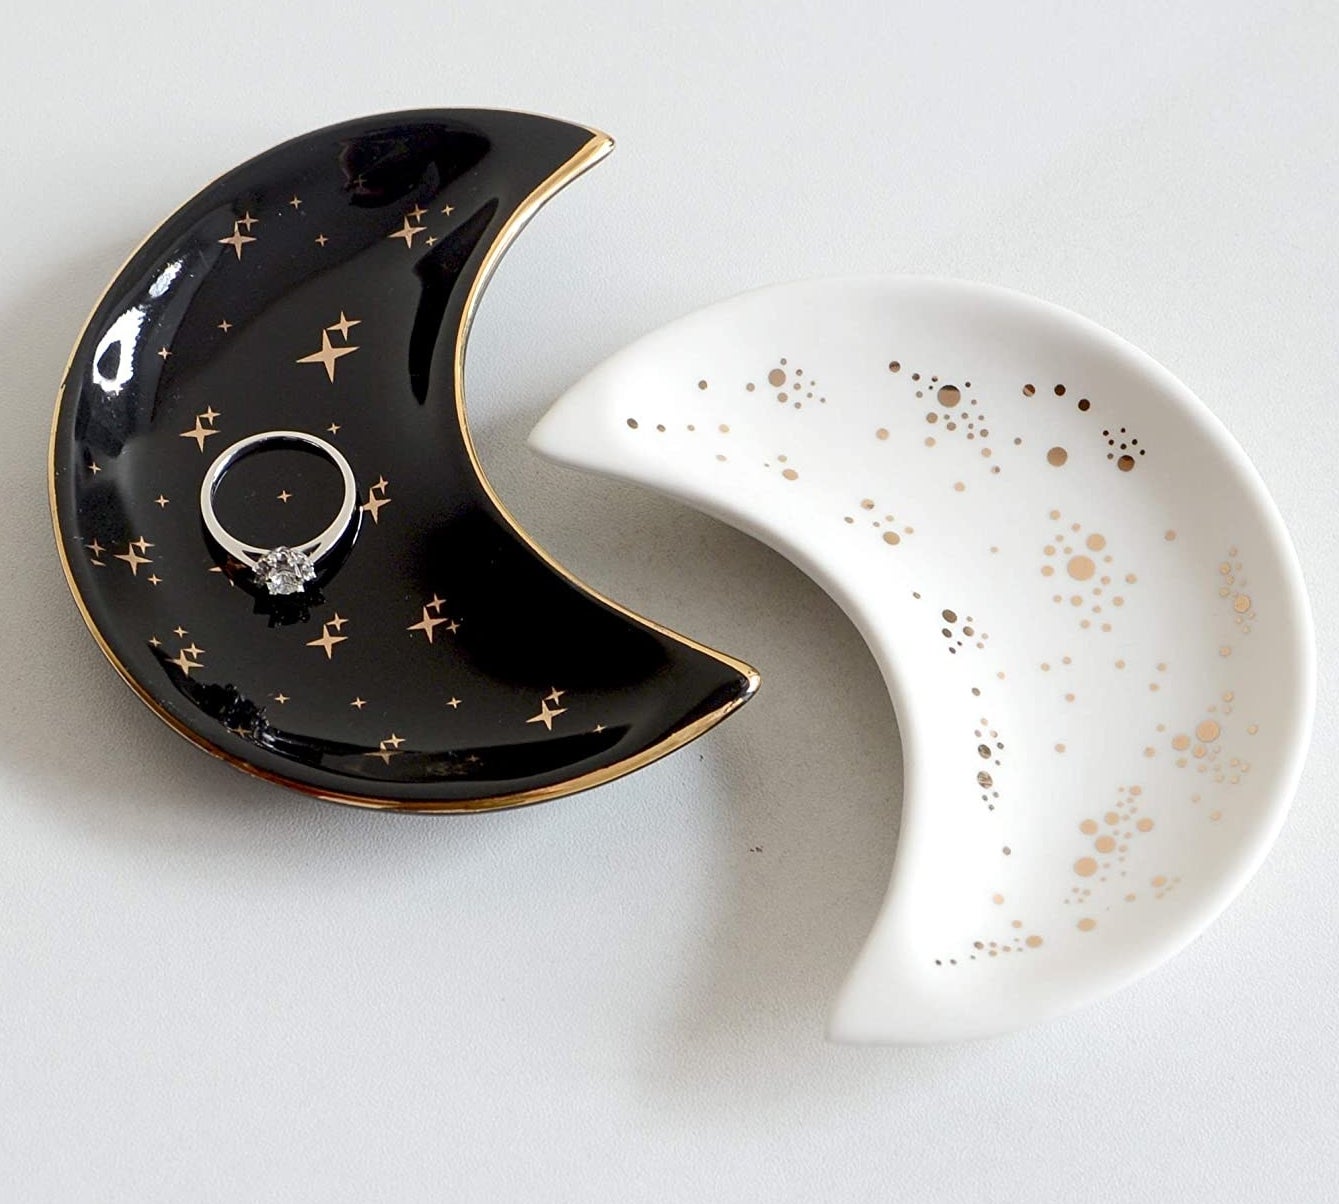 The black and white moon trinket dishes holding a ring